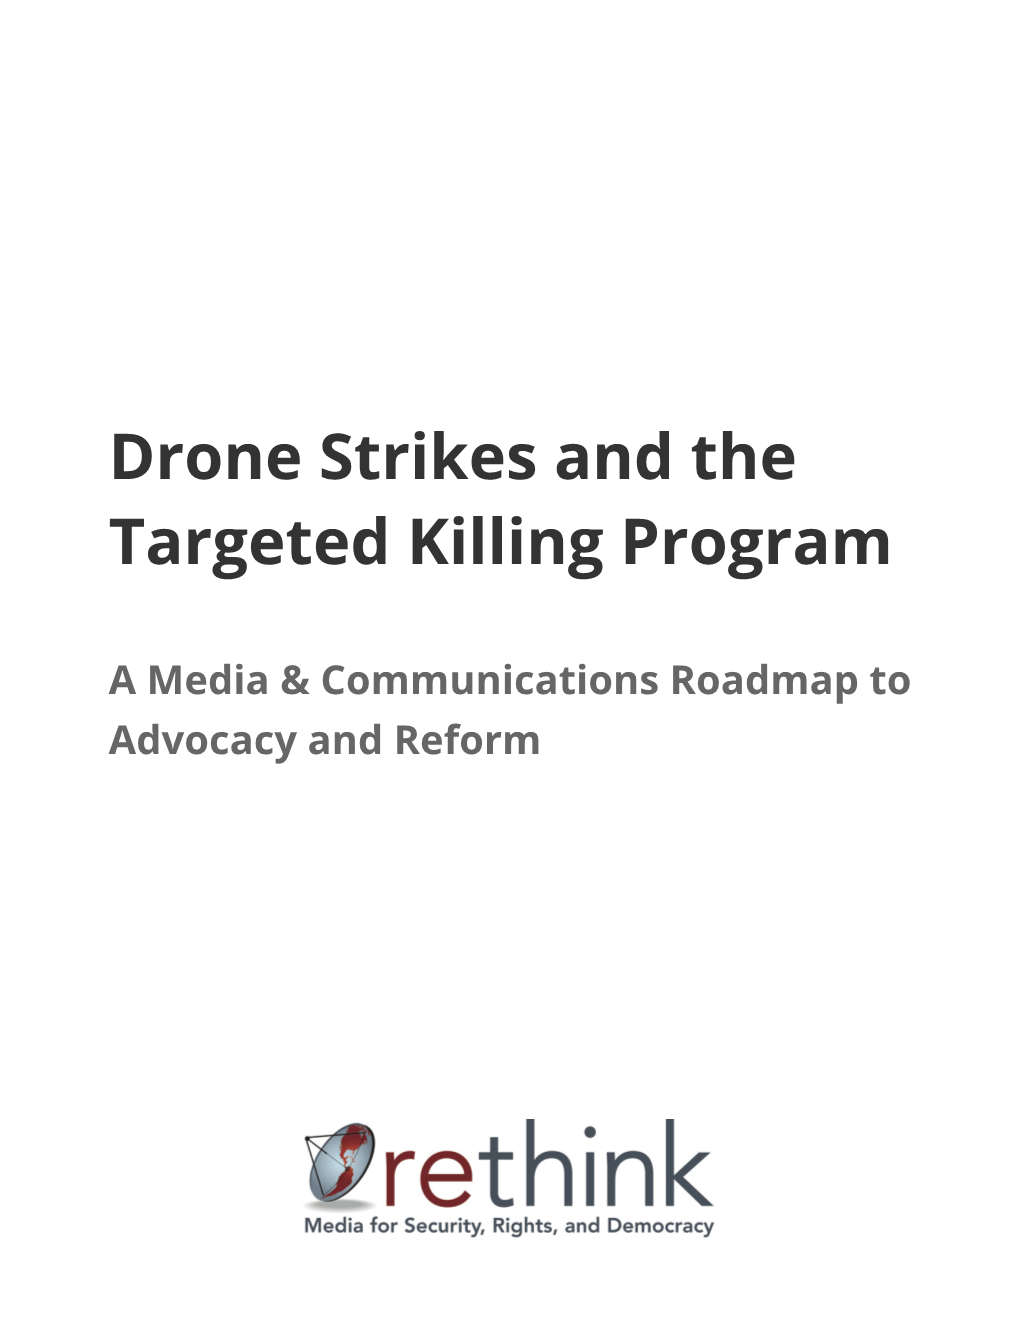 Drone Strikes and the Targeted Killing Program